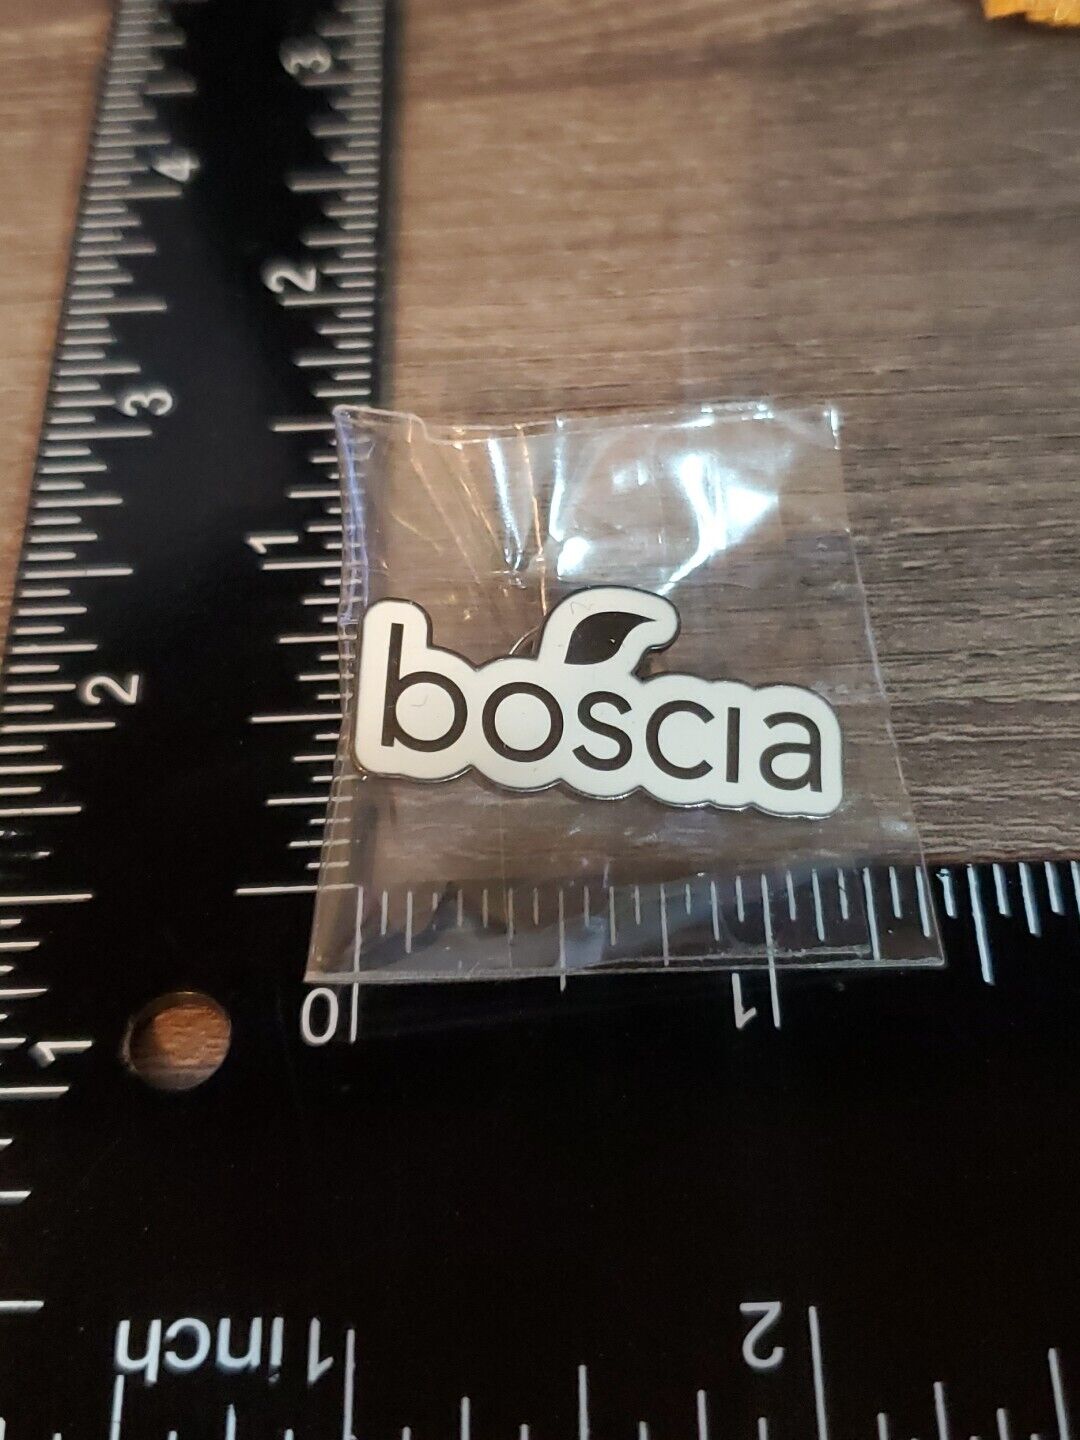 Boscia Skincare Products Advertising Lapel Pin G2